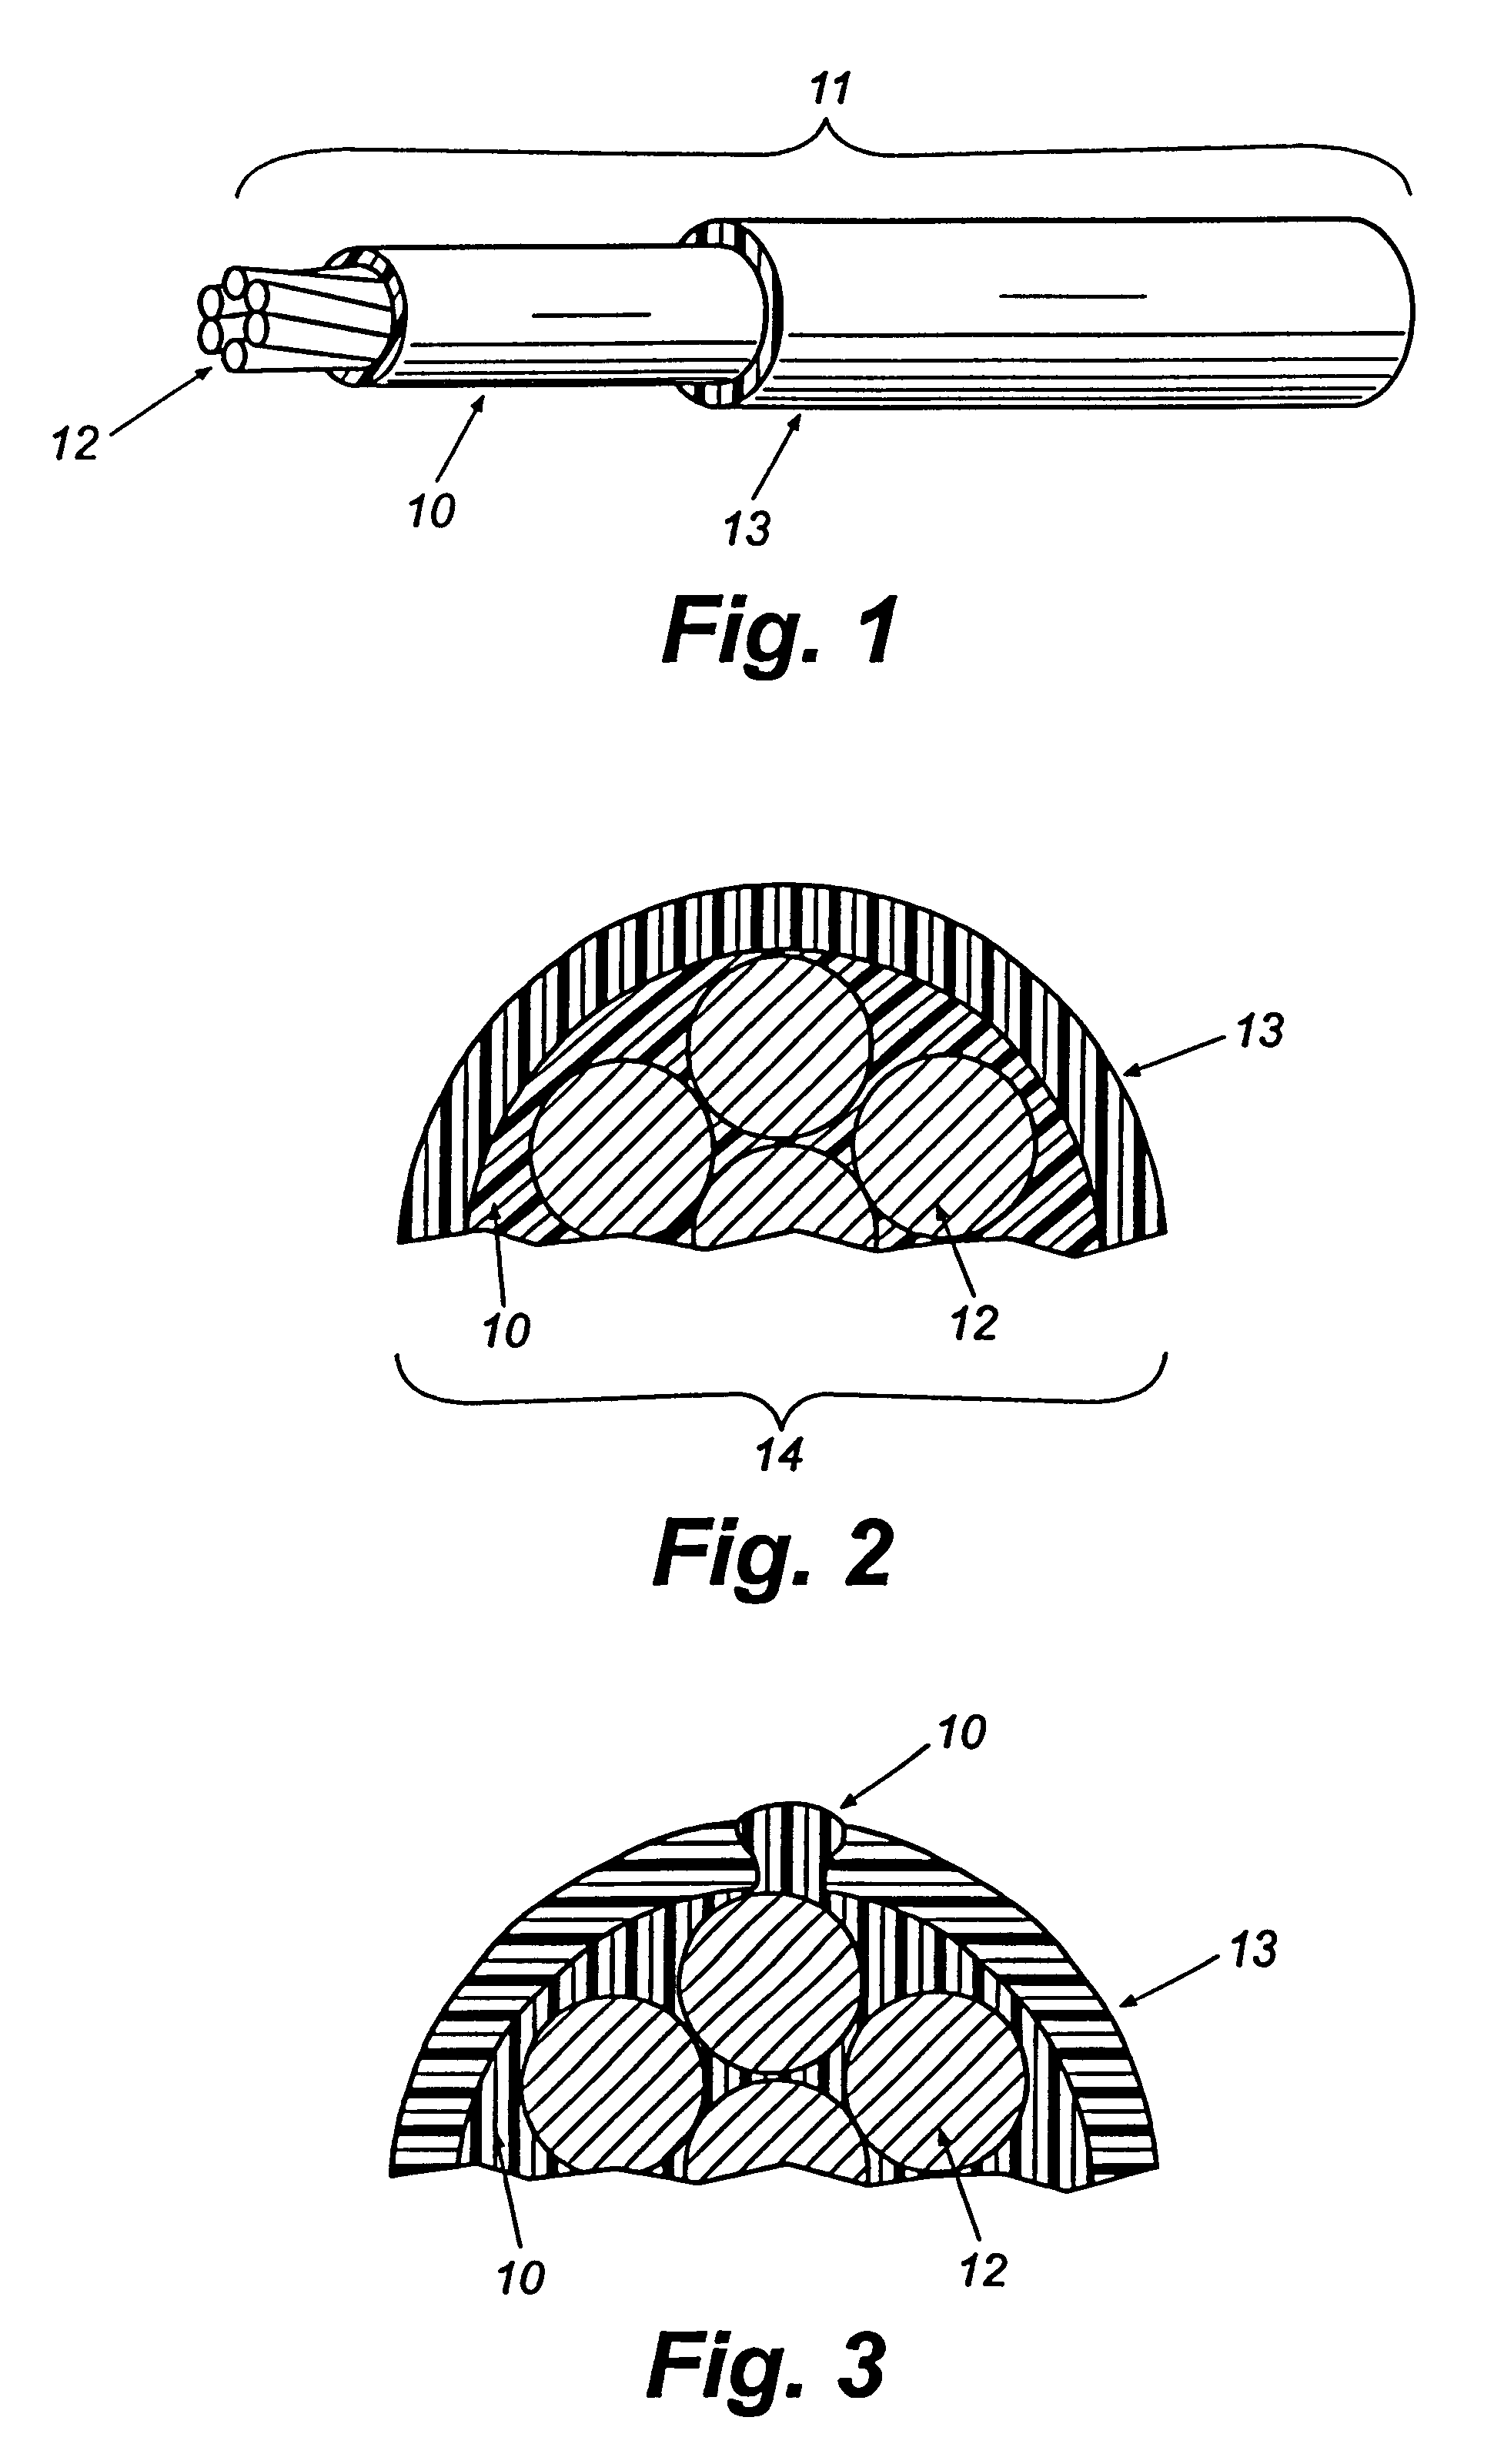 Electrical cable having a self-sealing agent and method for preventing water from contacting the conductor